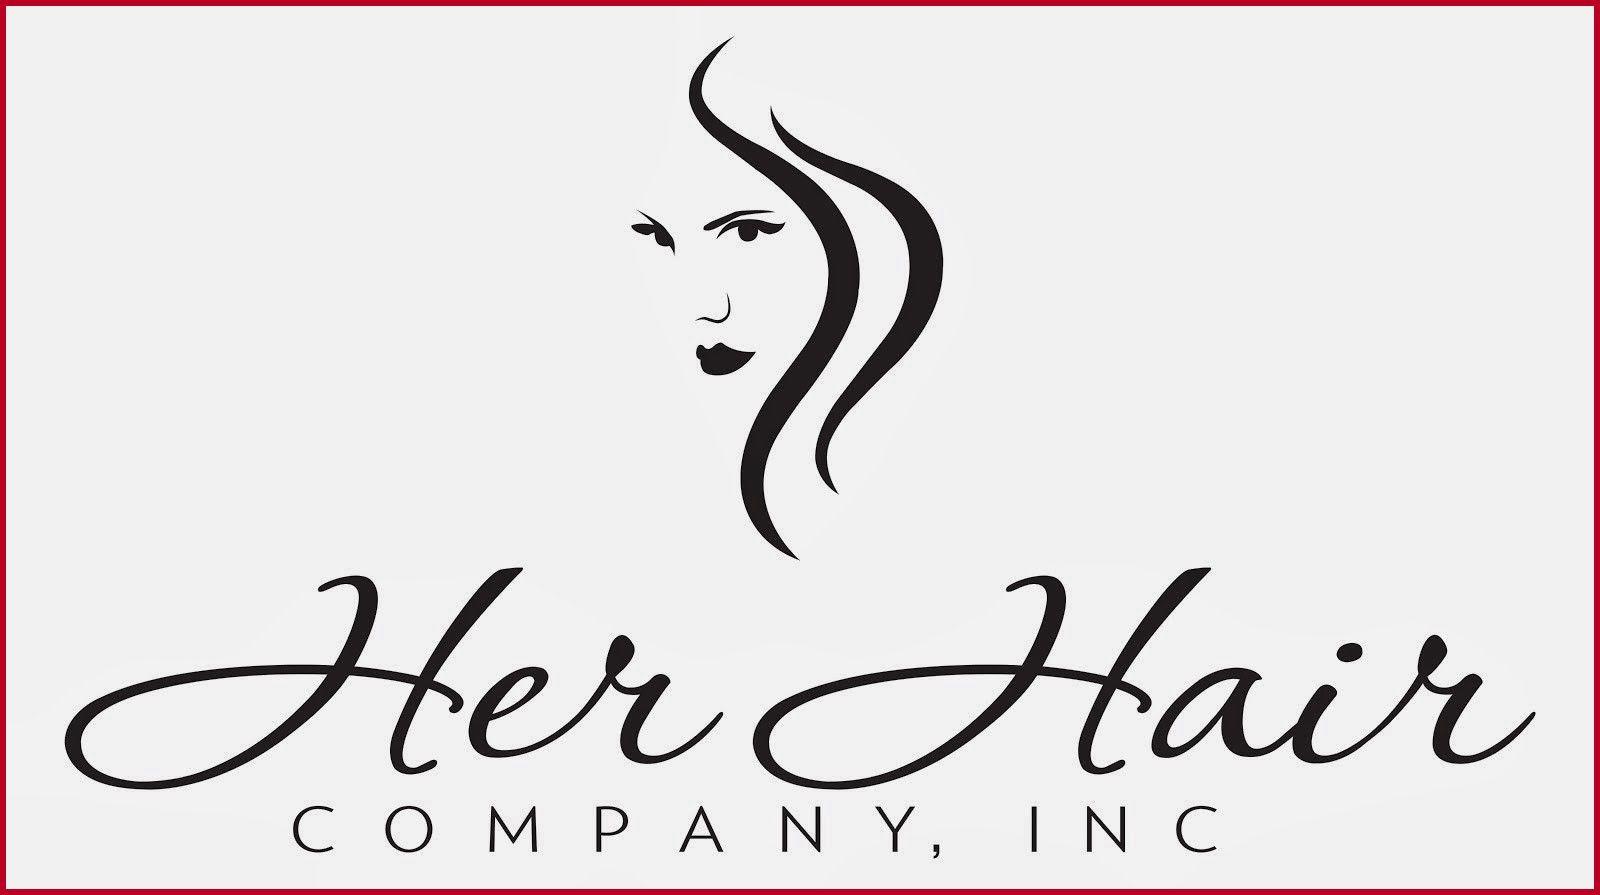 Hairstyles Logo - Hairstyles Logo 423175 Beauty Salon Clipart at Getdrawings